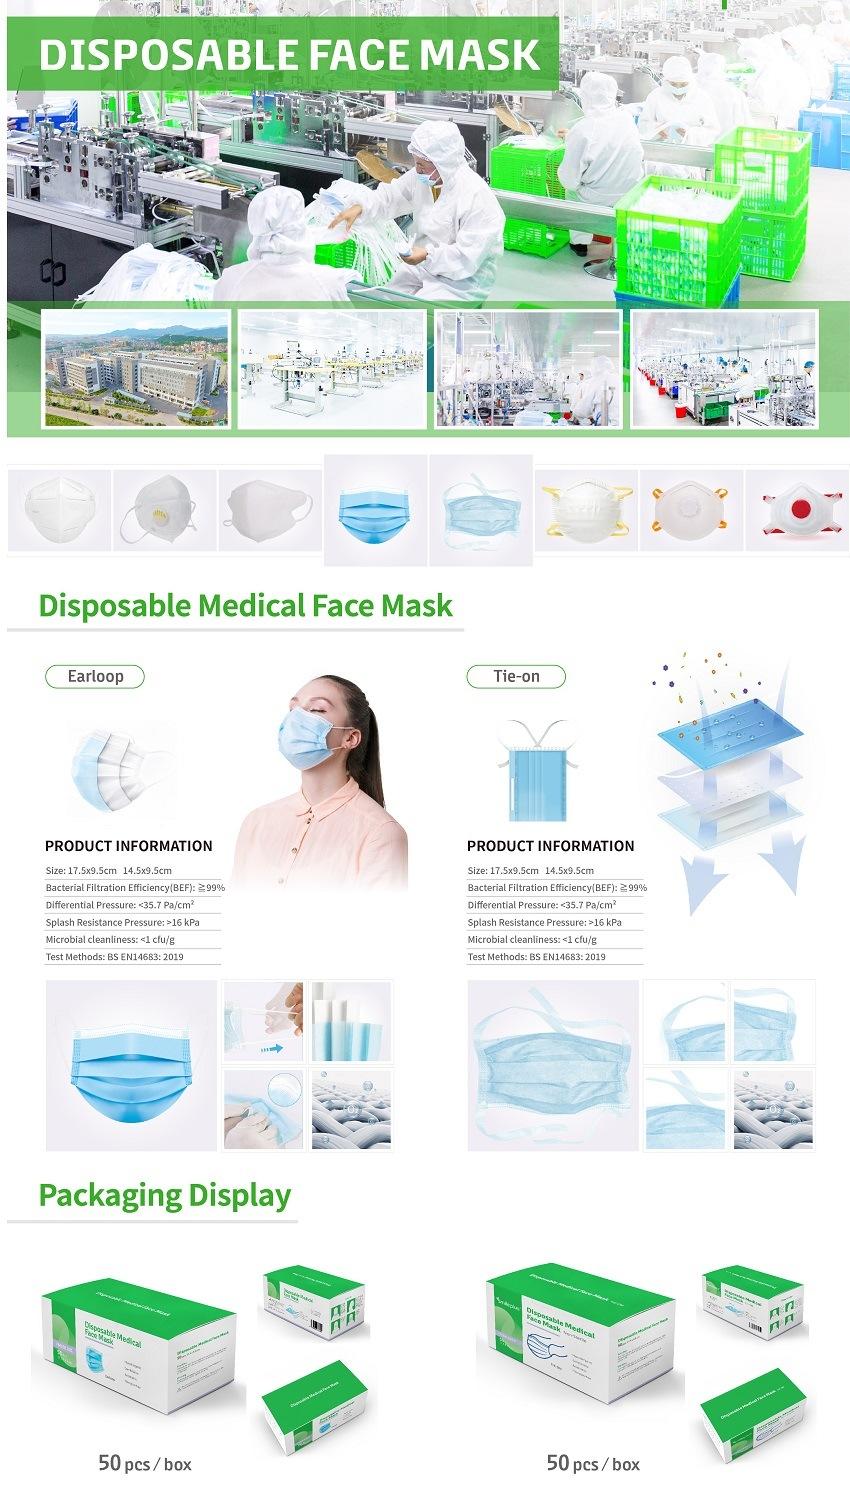 Goldenwell Disposable Medical Mask Type Surigical Face Mask Earloop Protective Face Cover